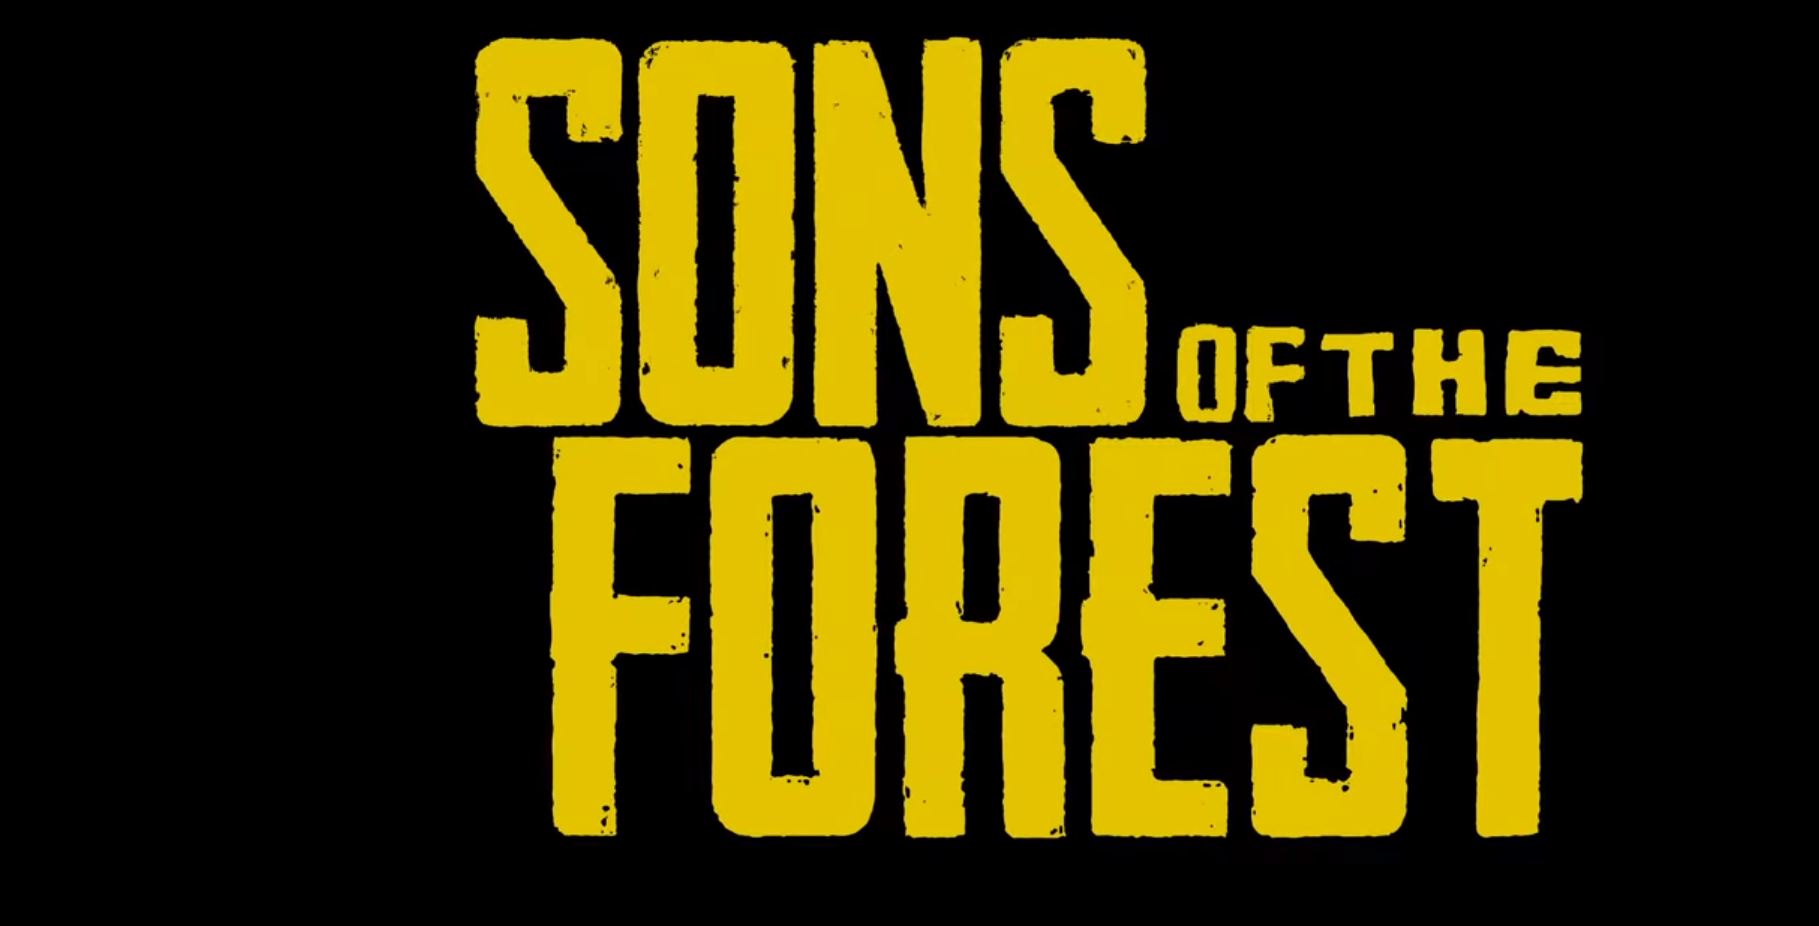 The Forest PS4 Sequel Sons Of The Forest Announced